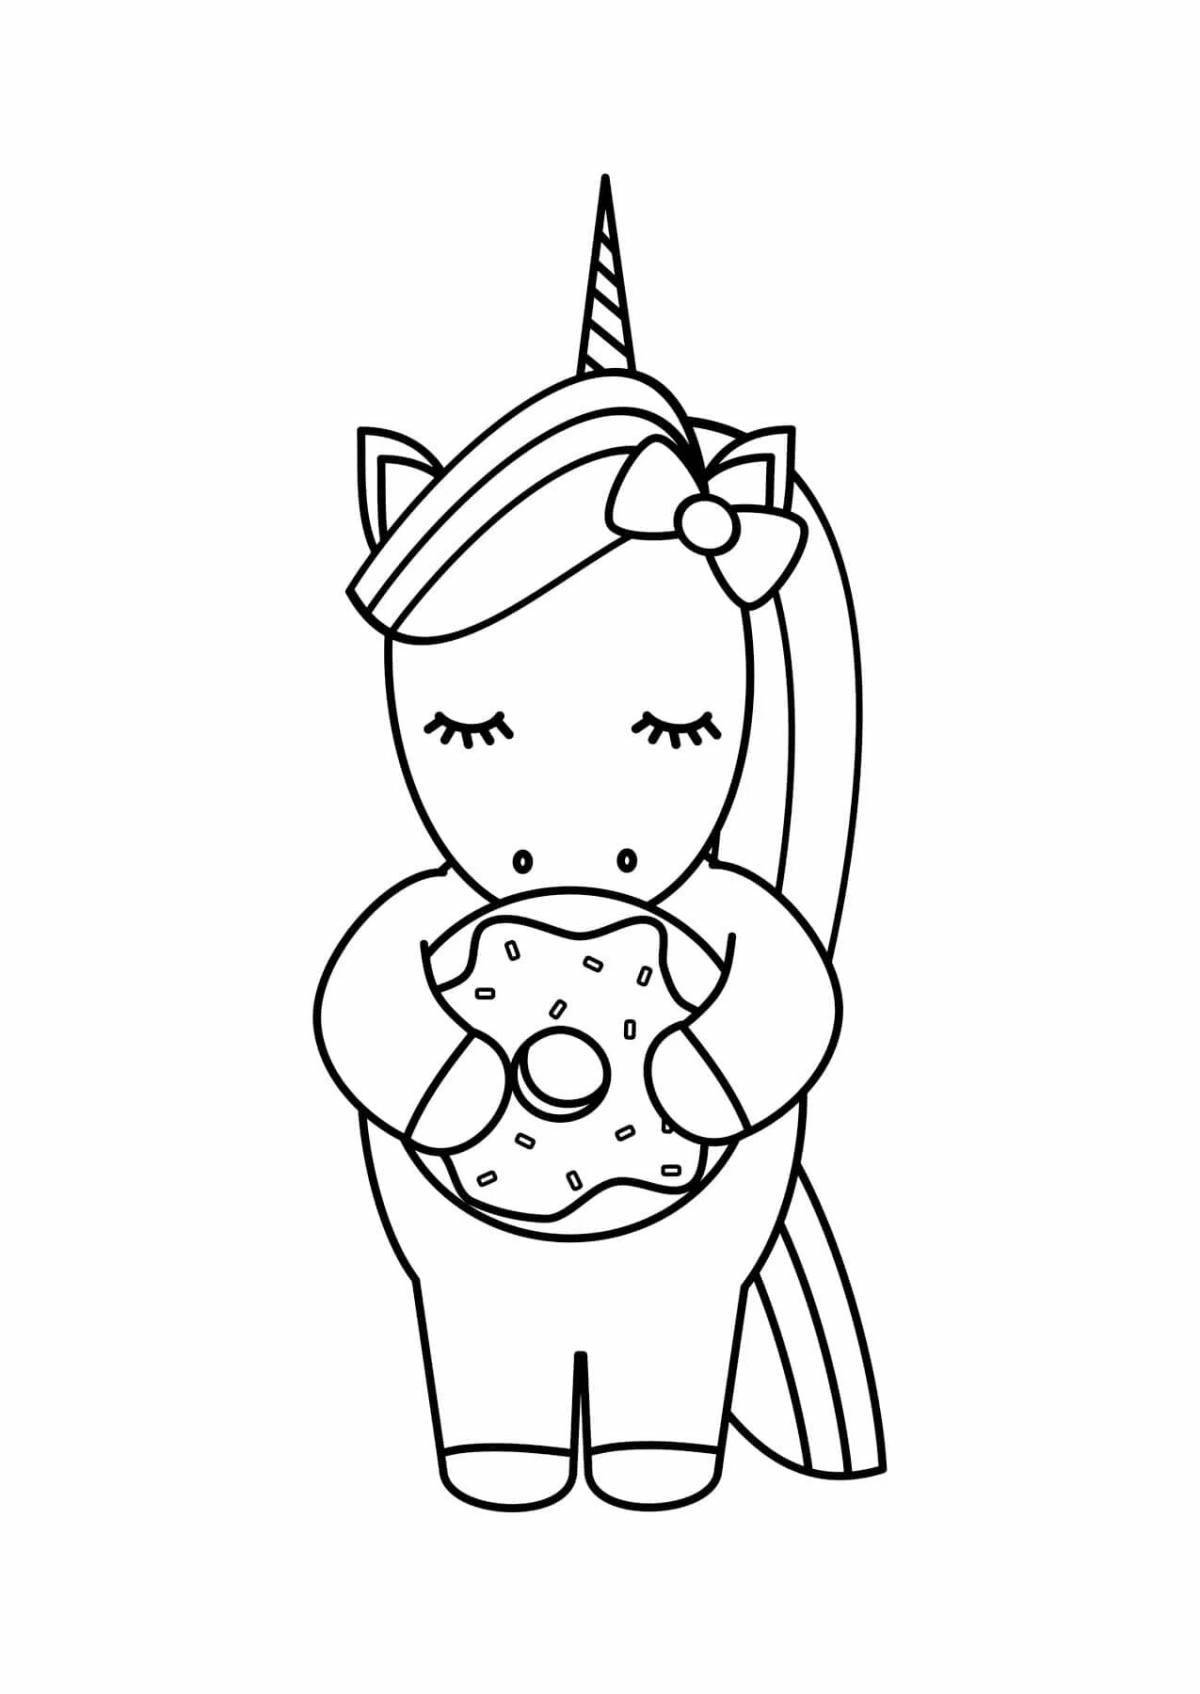 Dazzling coloring book of a girl dressed as a unicorn